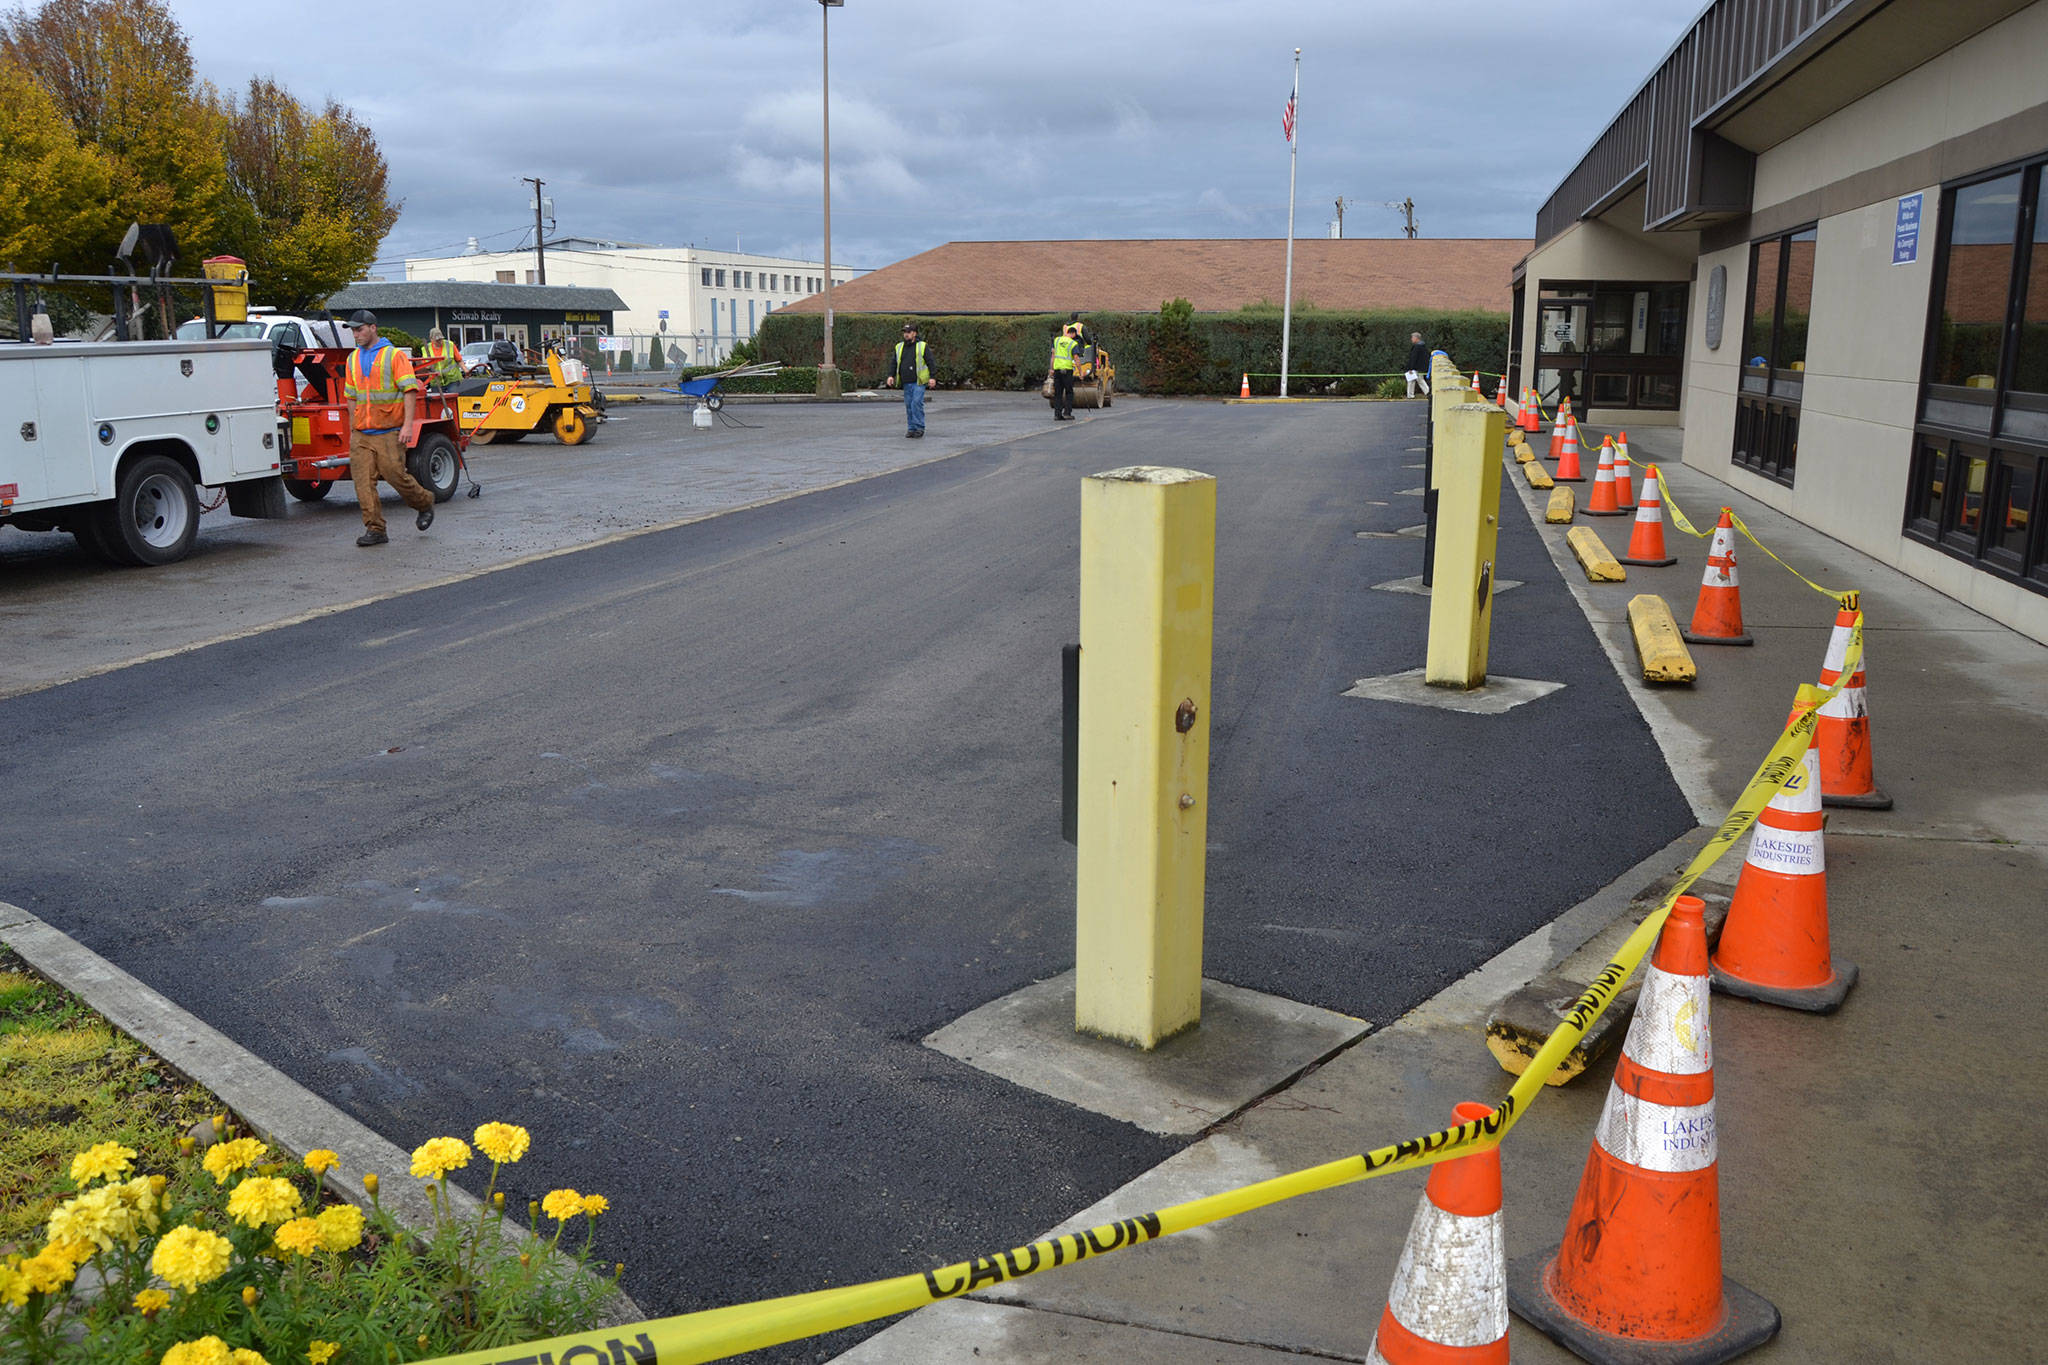 On Oct. 31-Nov. 1, Lakeside Industries resurfaced a portion of the Sequim Post Office’s parking lot that has been deteriorating in recent years. Sequim Gazette photos by Matthew Nash